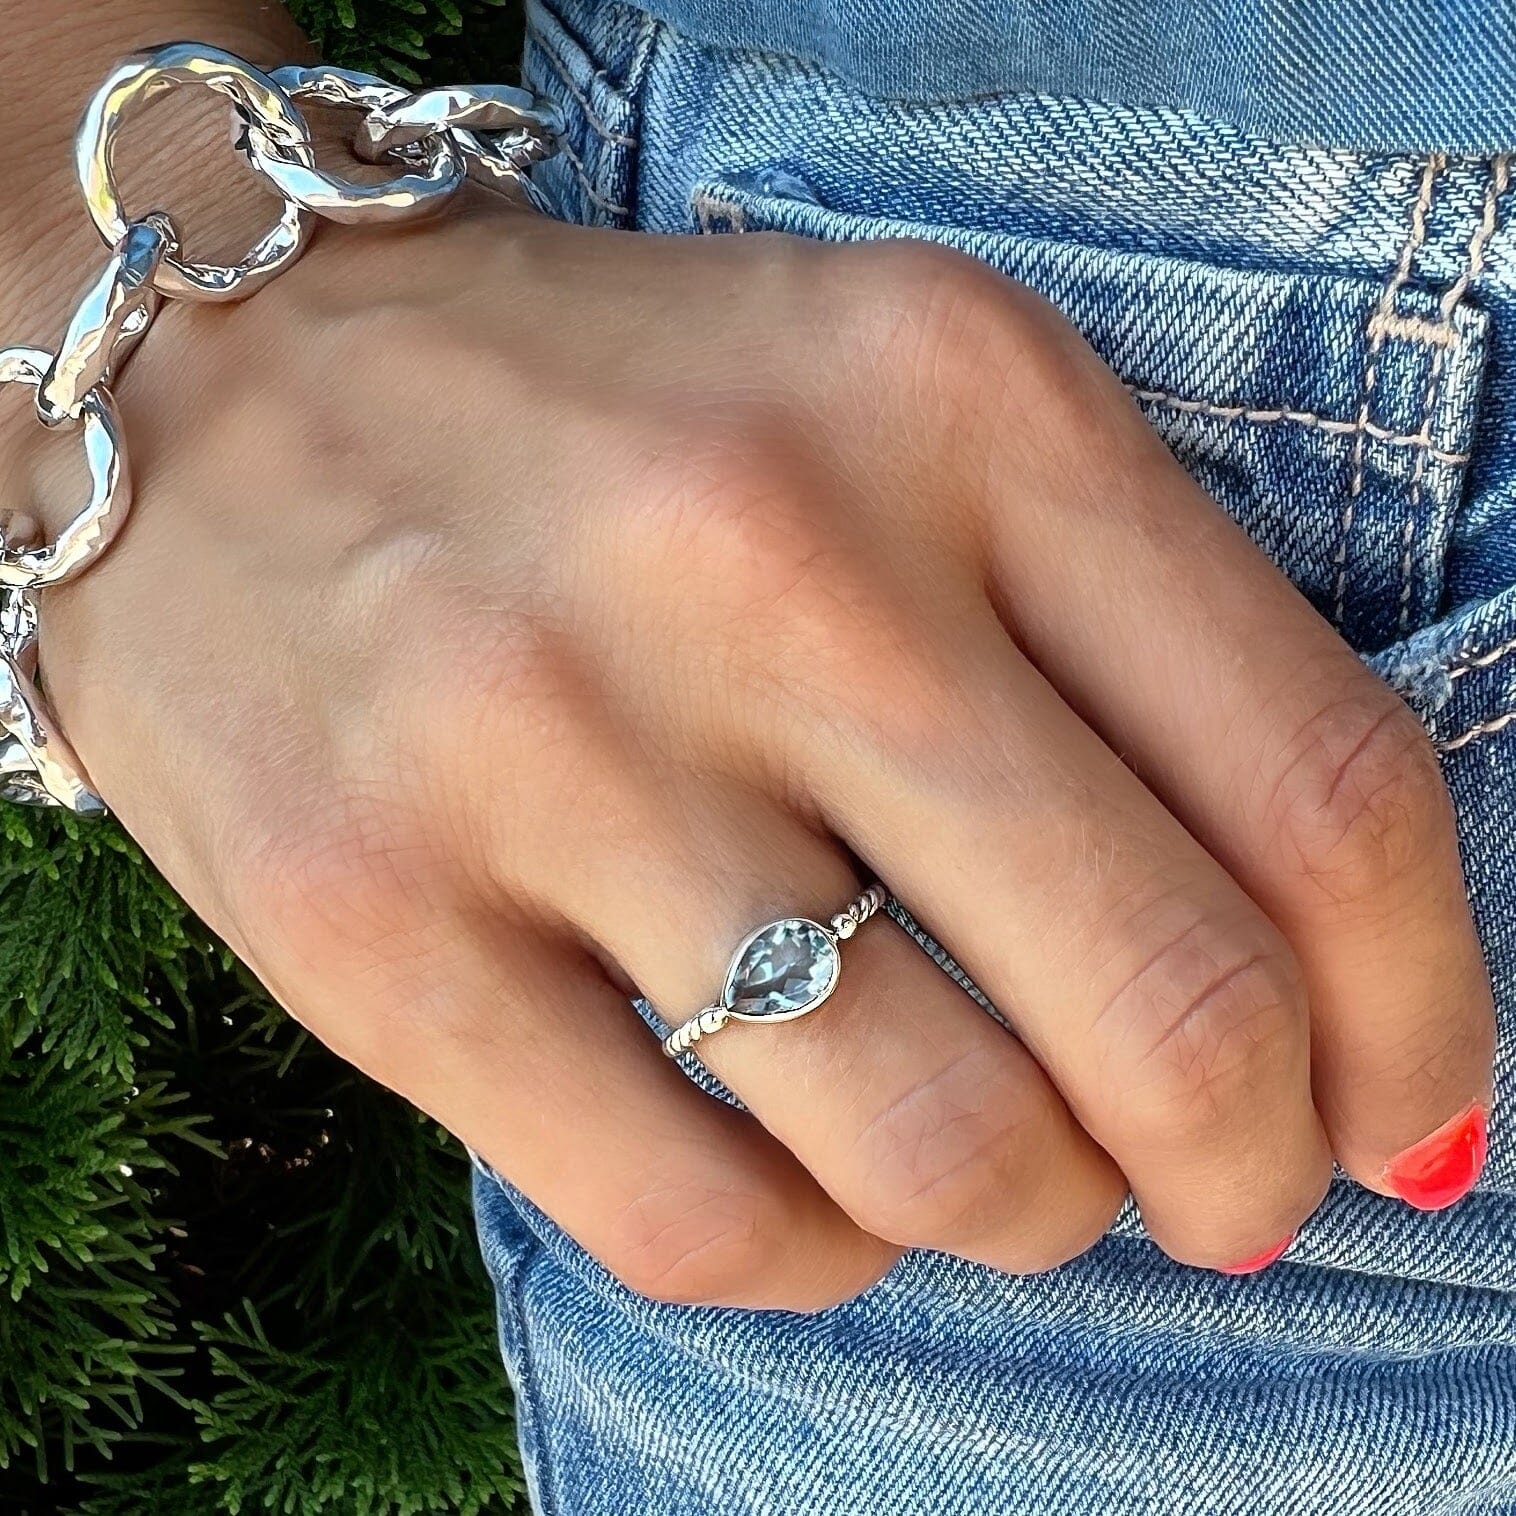 Tru Blu Ring paired with Today's Girl Bracelet